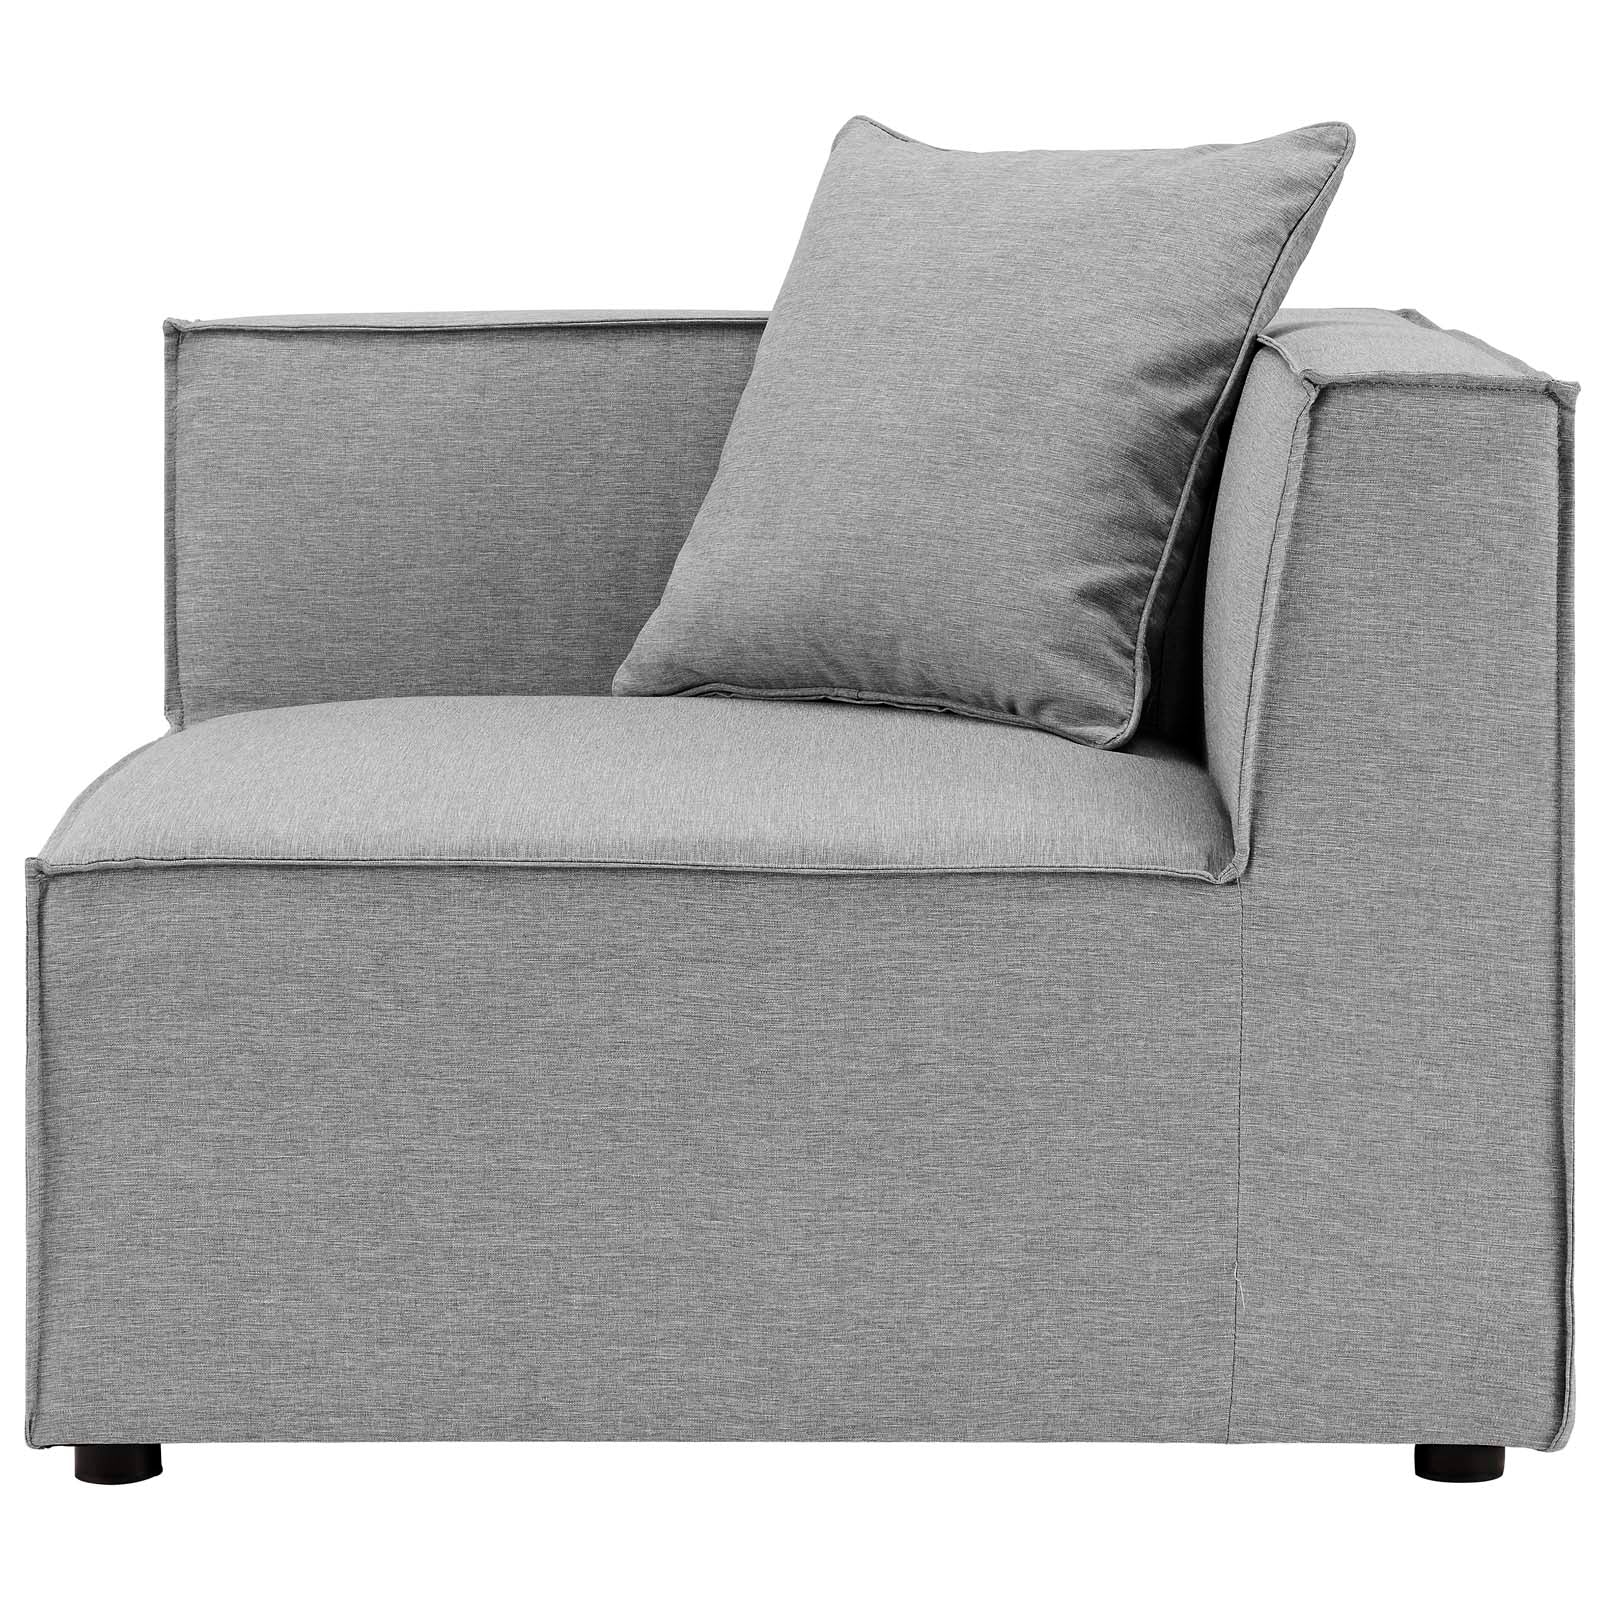 Saybrook Outdoor Patio Upholstered 6-Piece Sectional Sofa - East Shore Modern Home Furnishings